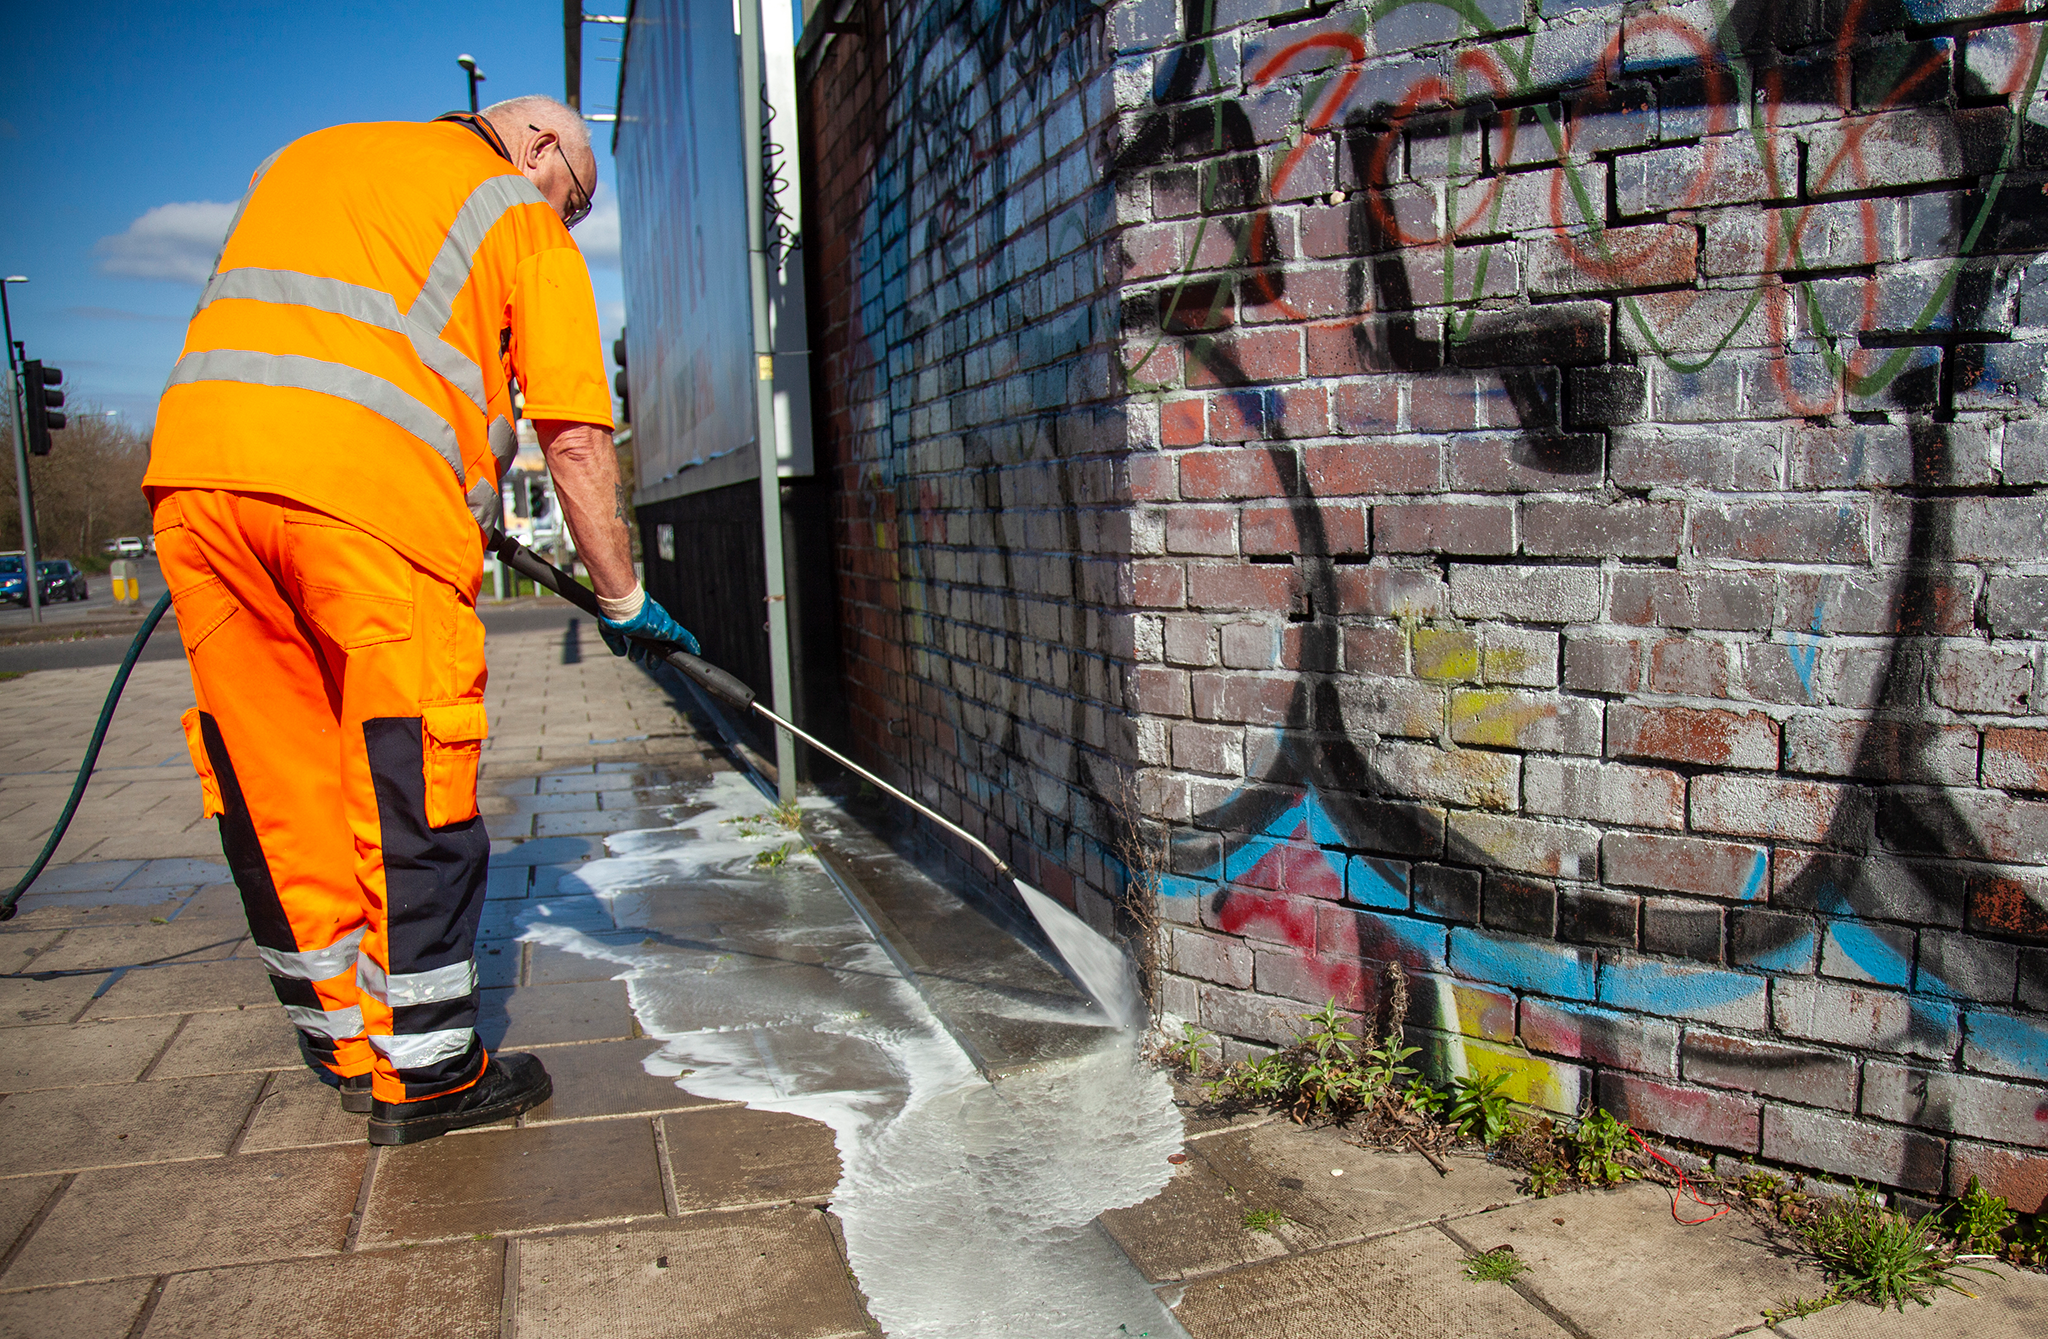 A Bristol Waste street cleansing operative using a jet washer to remove graffiti from a wall